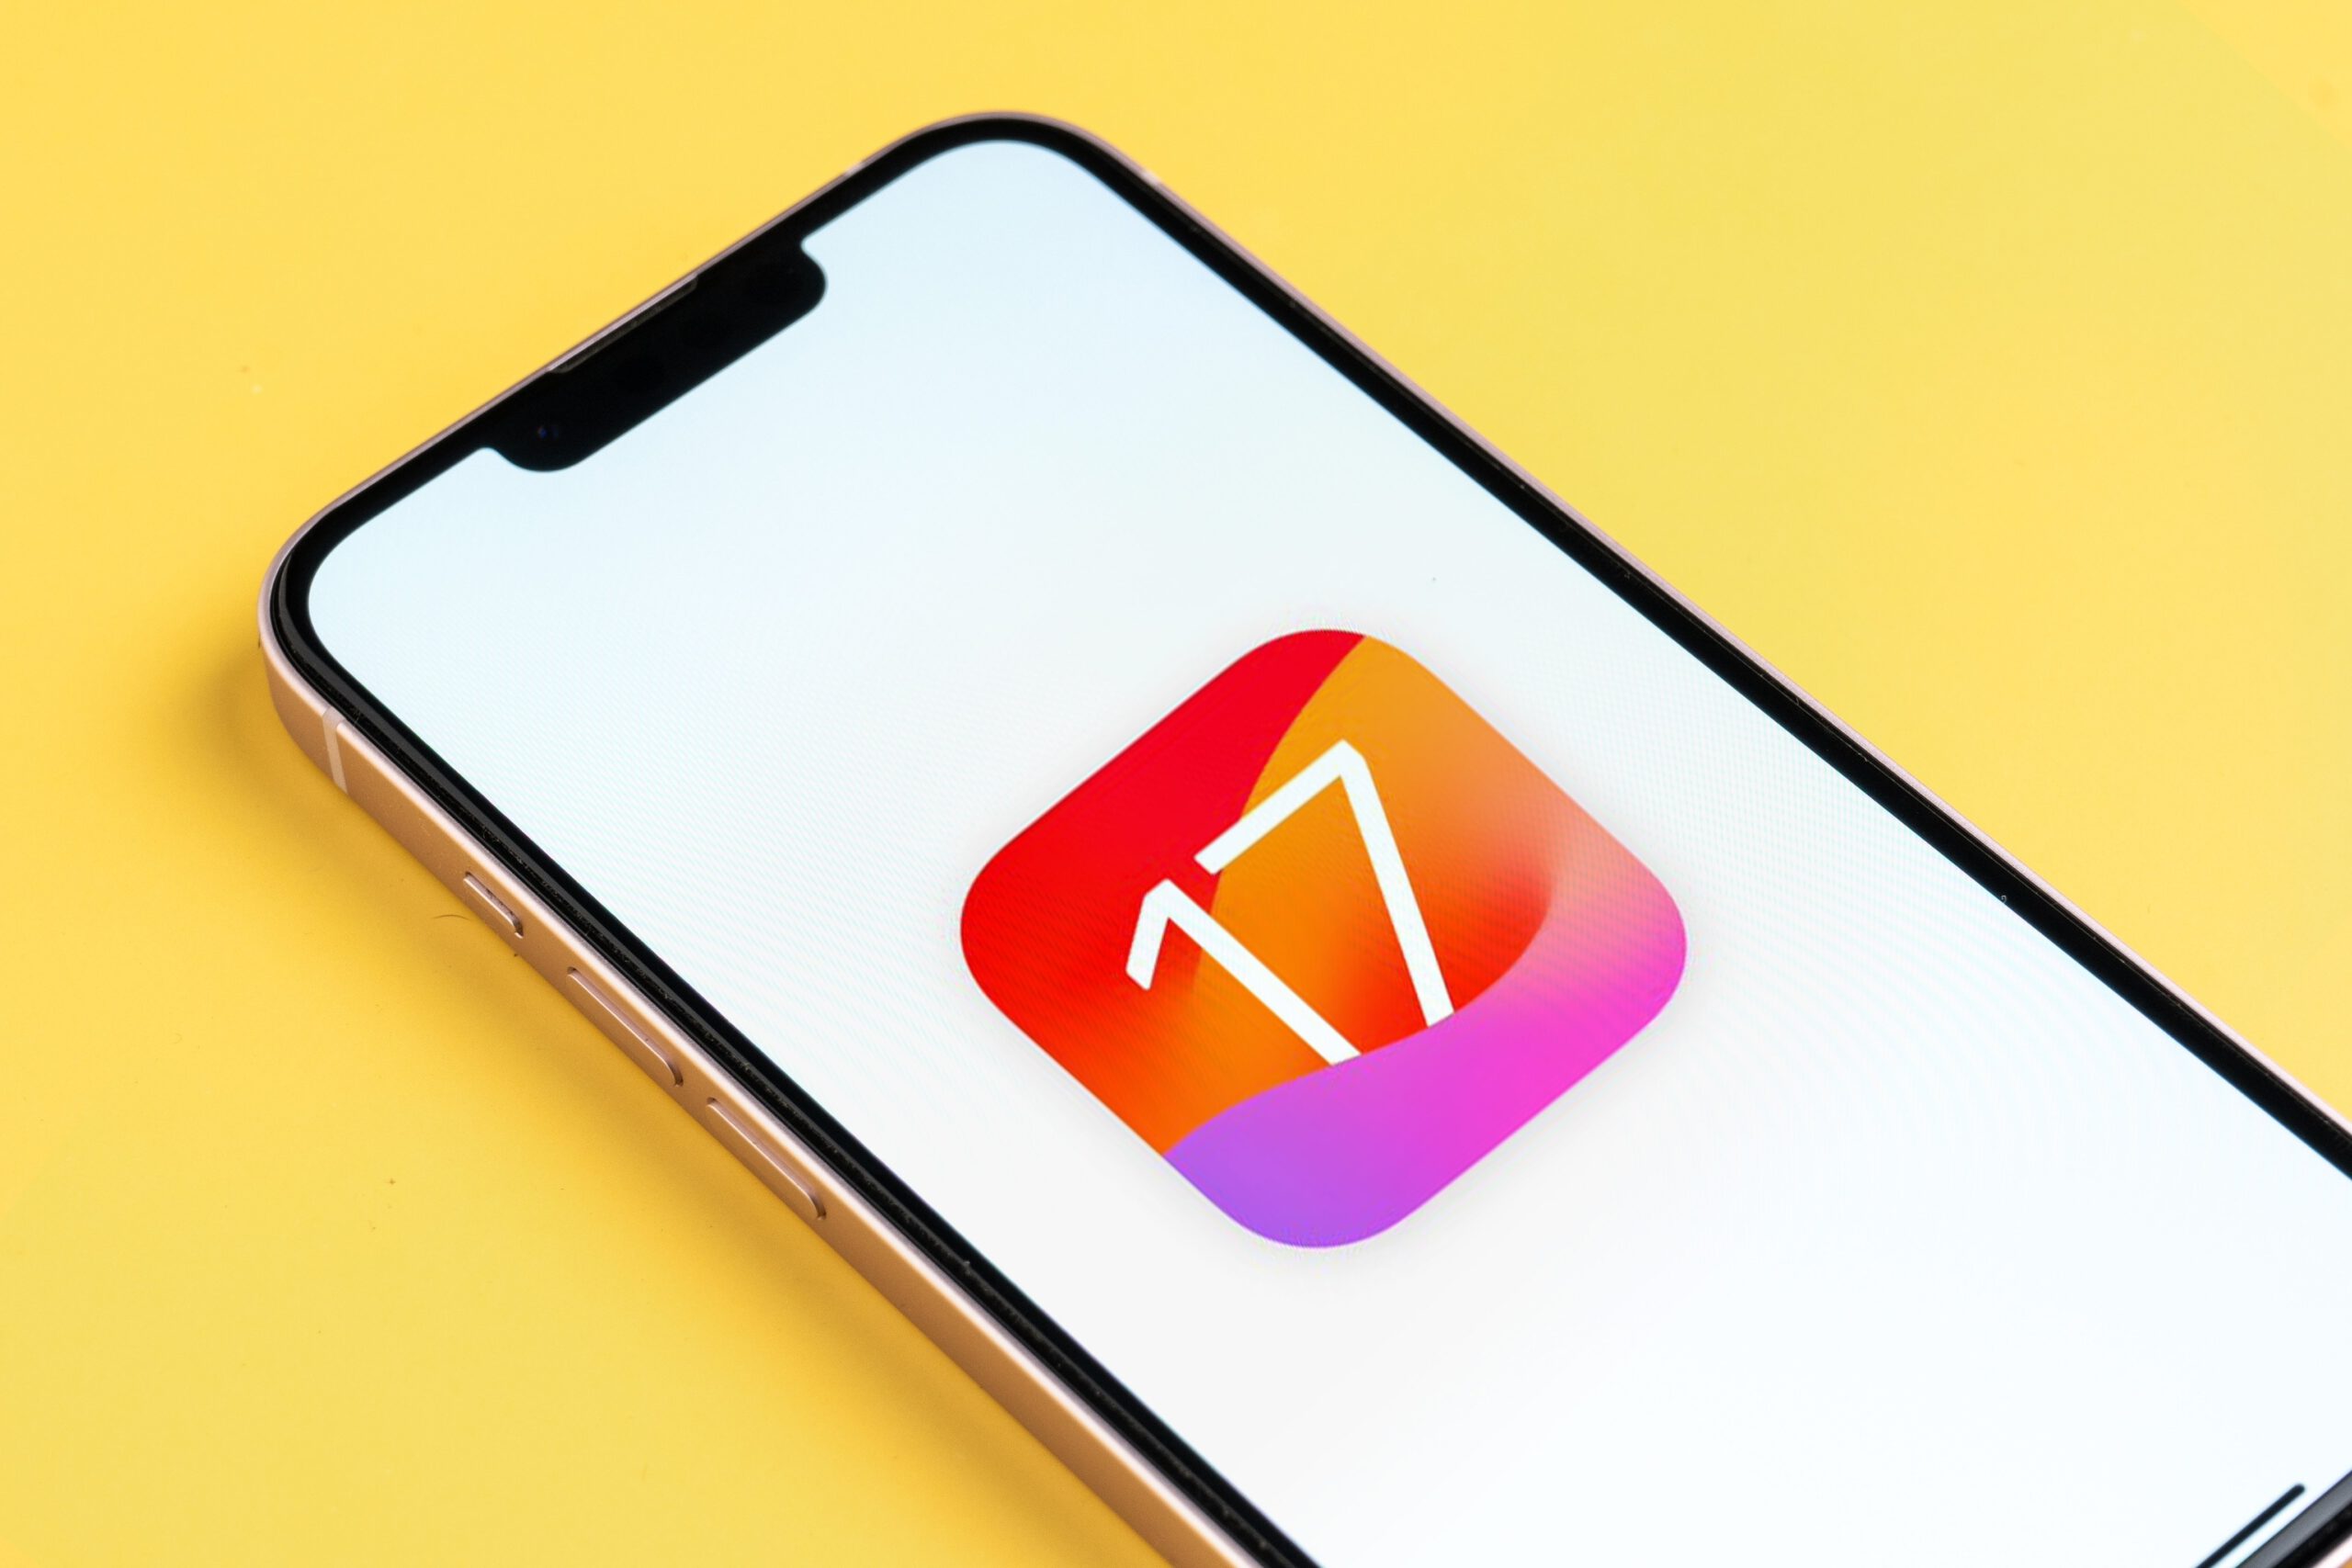 iOS 17 logo on an iPhone against a yellow background